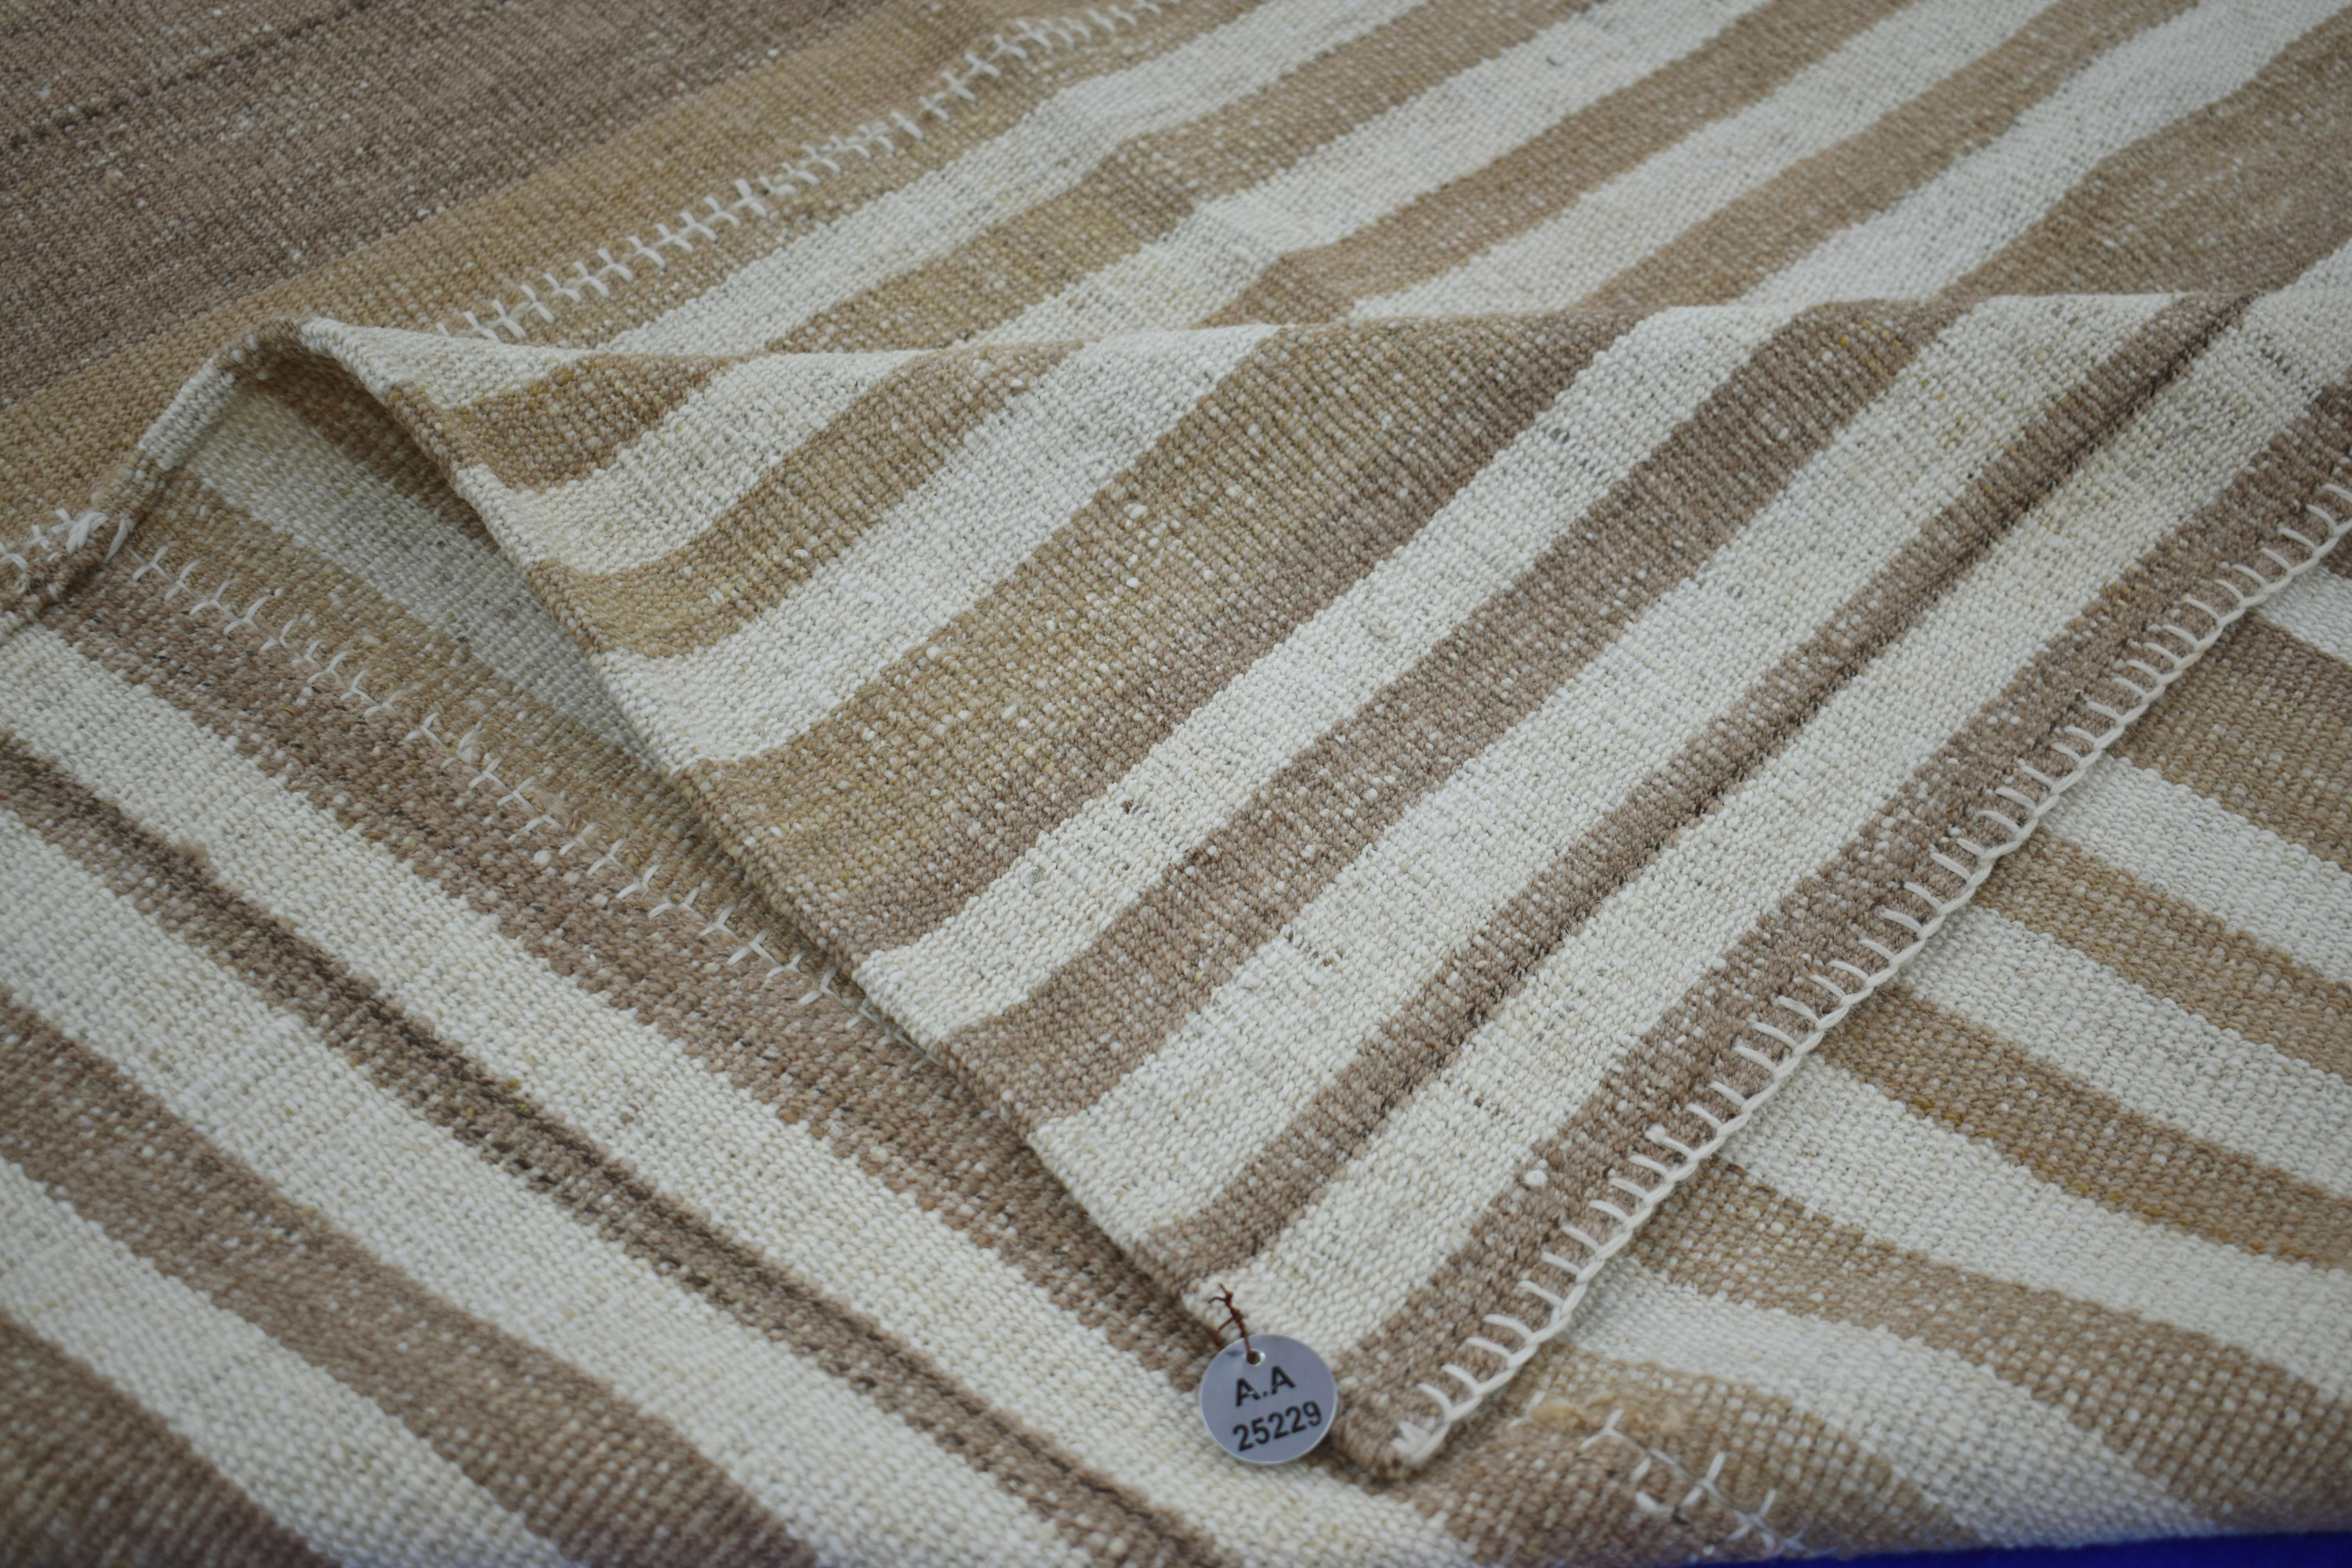  A new production Turkish rug handwoven from the finest sheep’s wool and colored with all-natural vegetable dyes that are safe for humans and pets. It’s a traditional Kilim flat-weave design featuring a striking ivory field of beige and brown